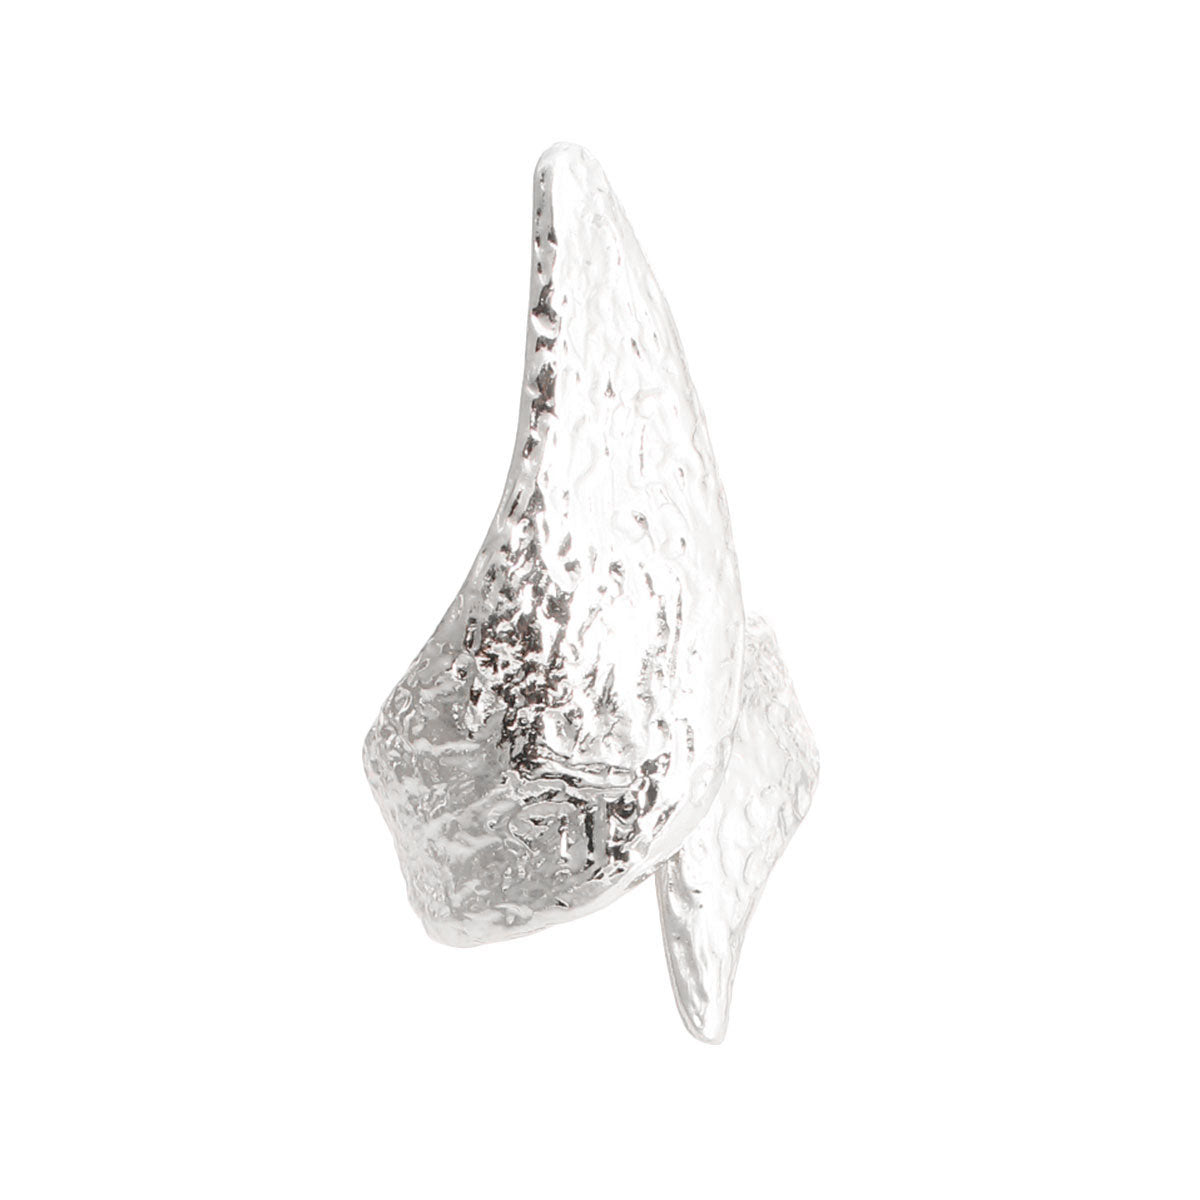 Hammered Silver Pointed Cuff